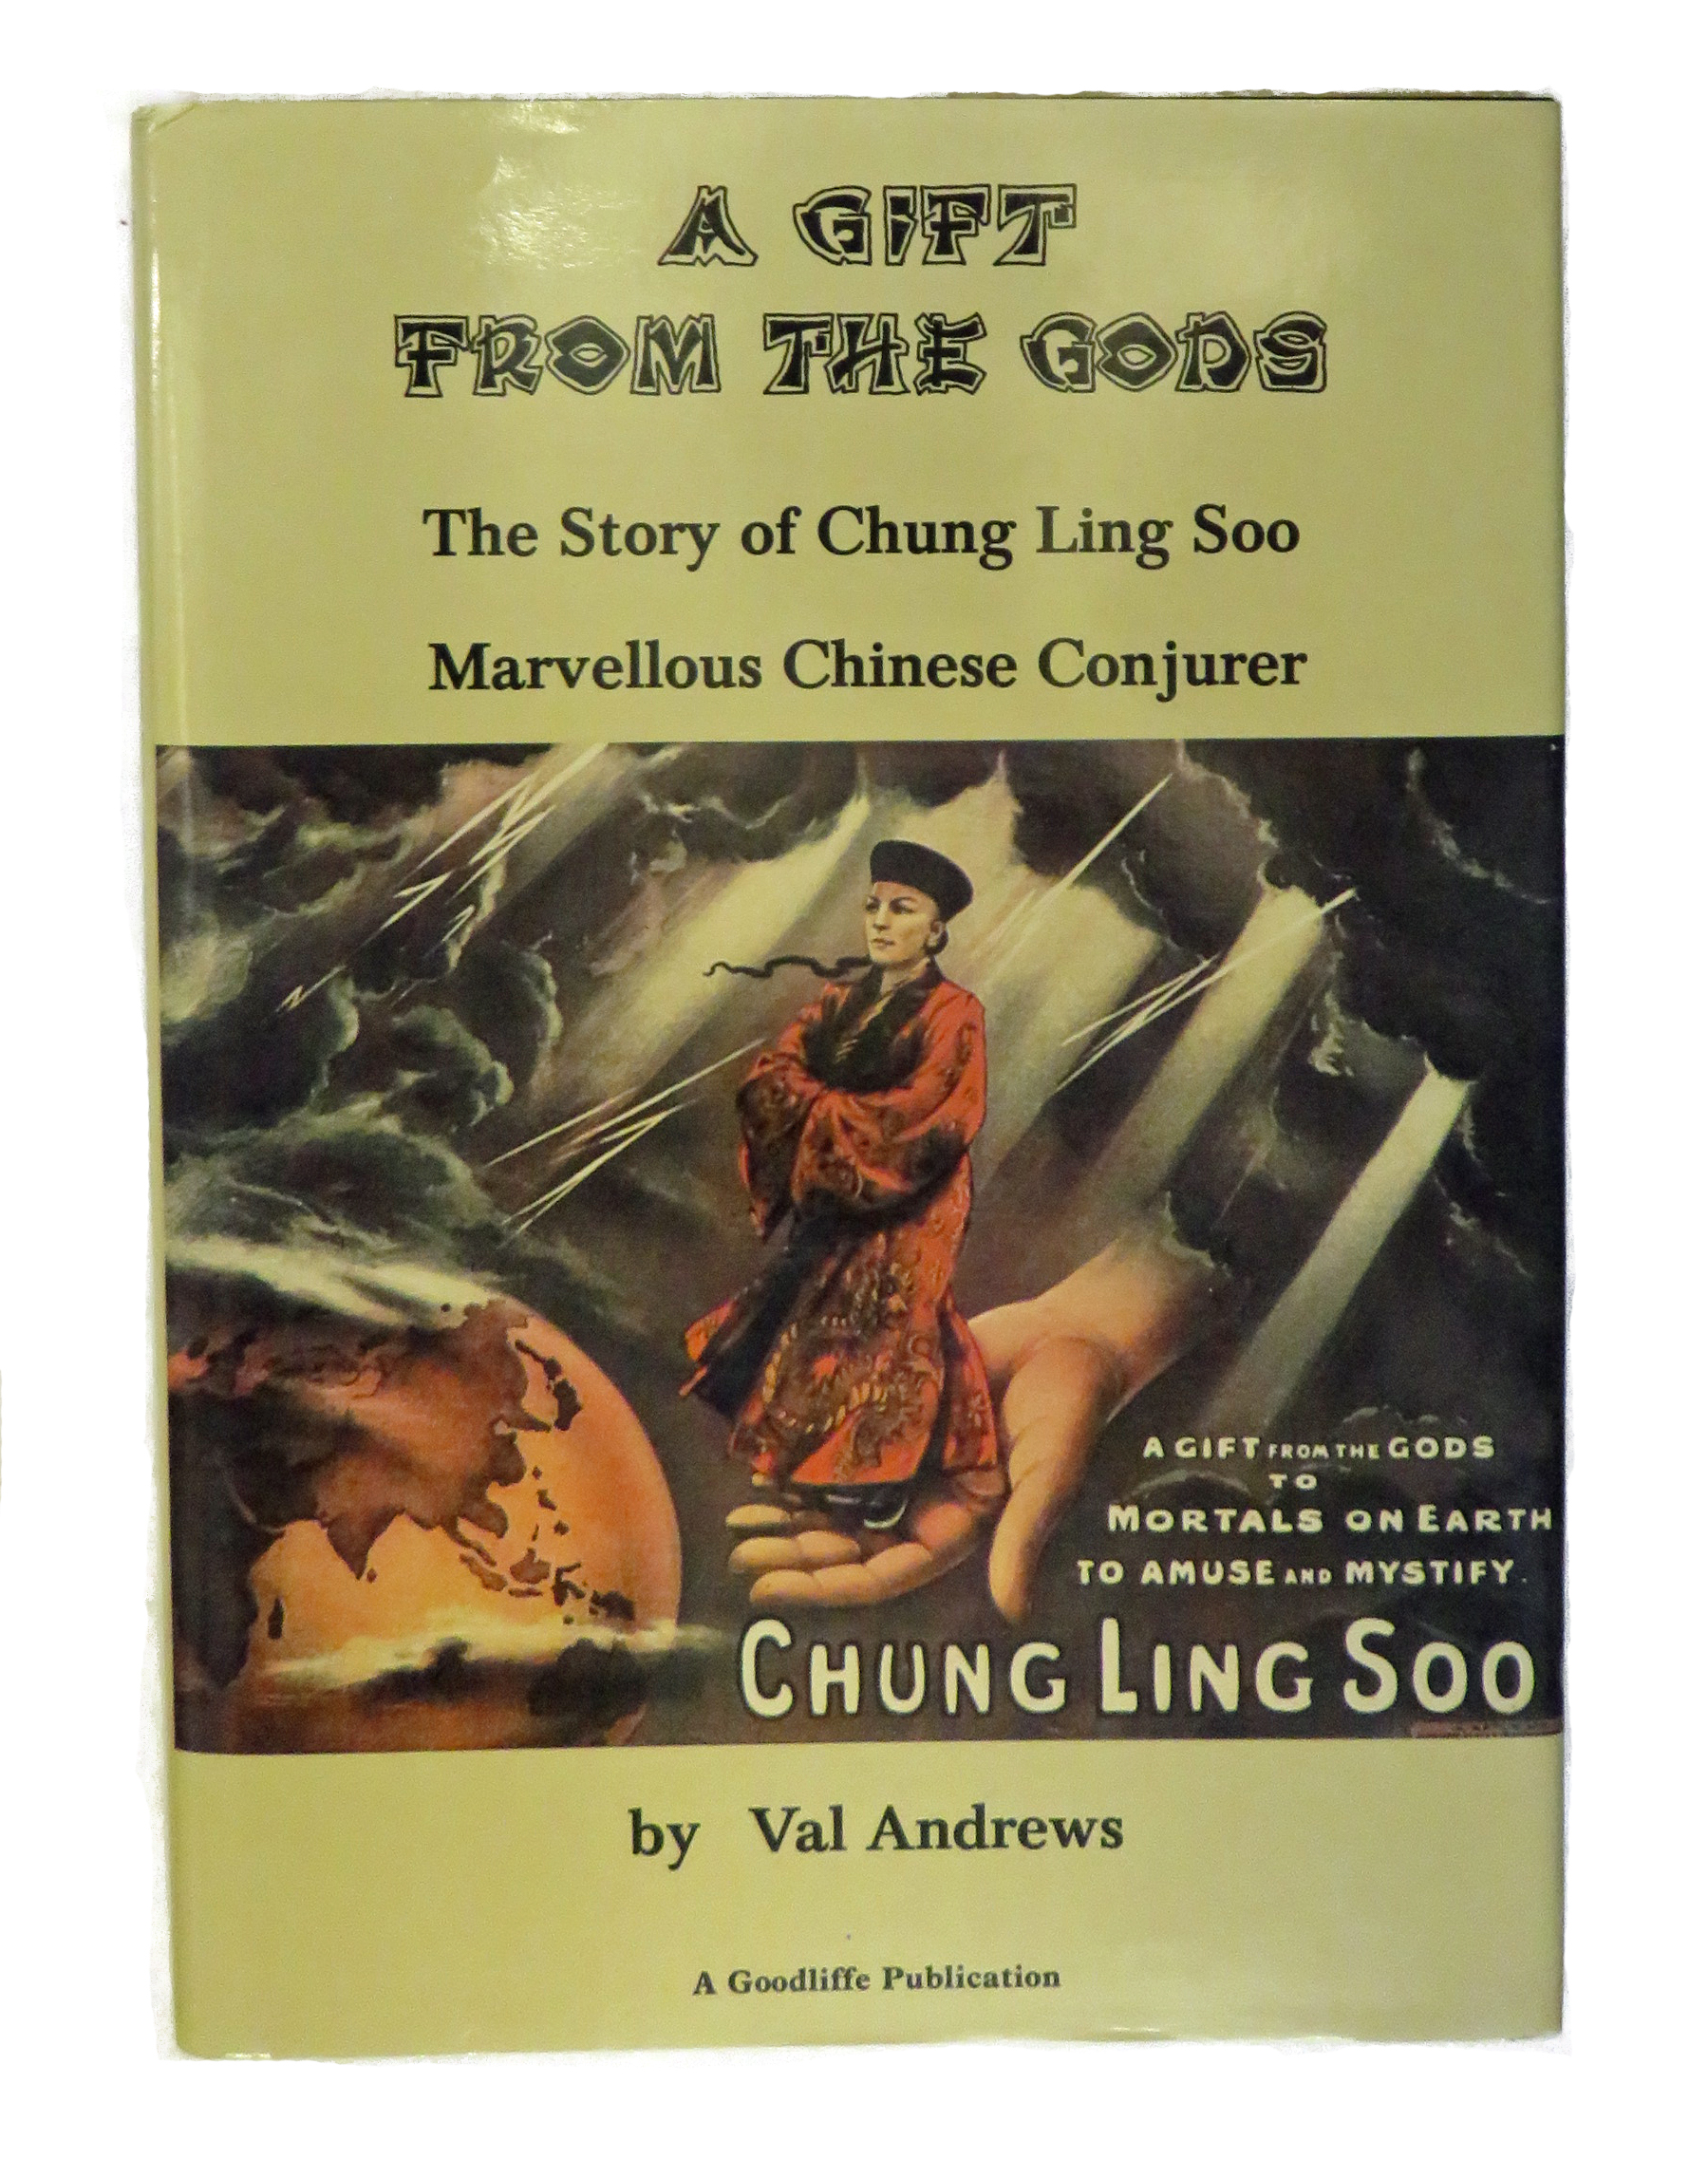 A Gift From the Gods. The Story of Chung Ling Soo Marvellous Chinese Conjurer